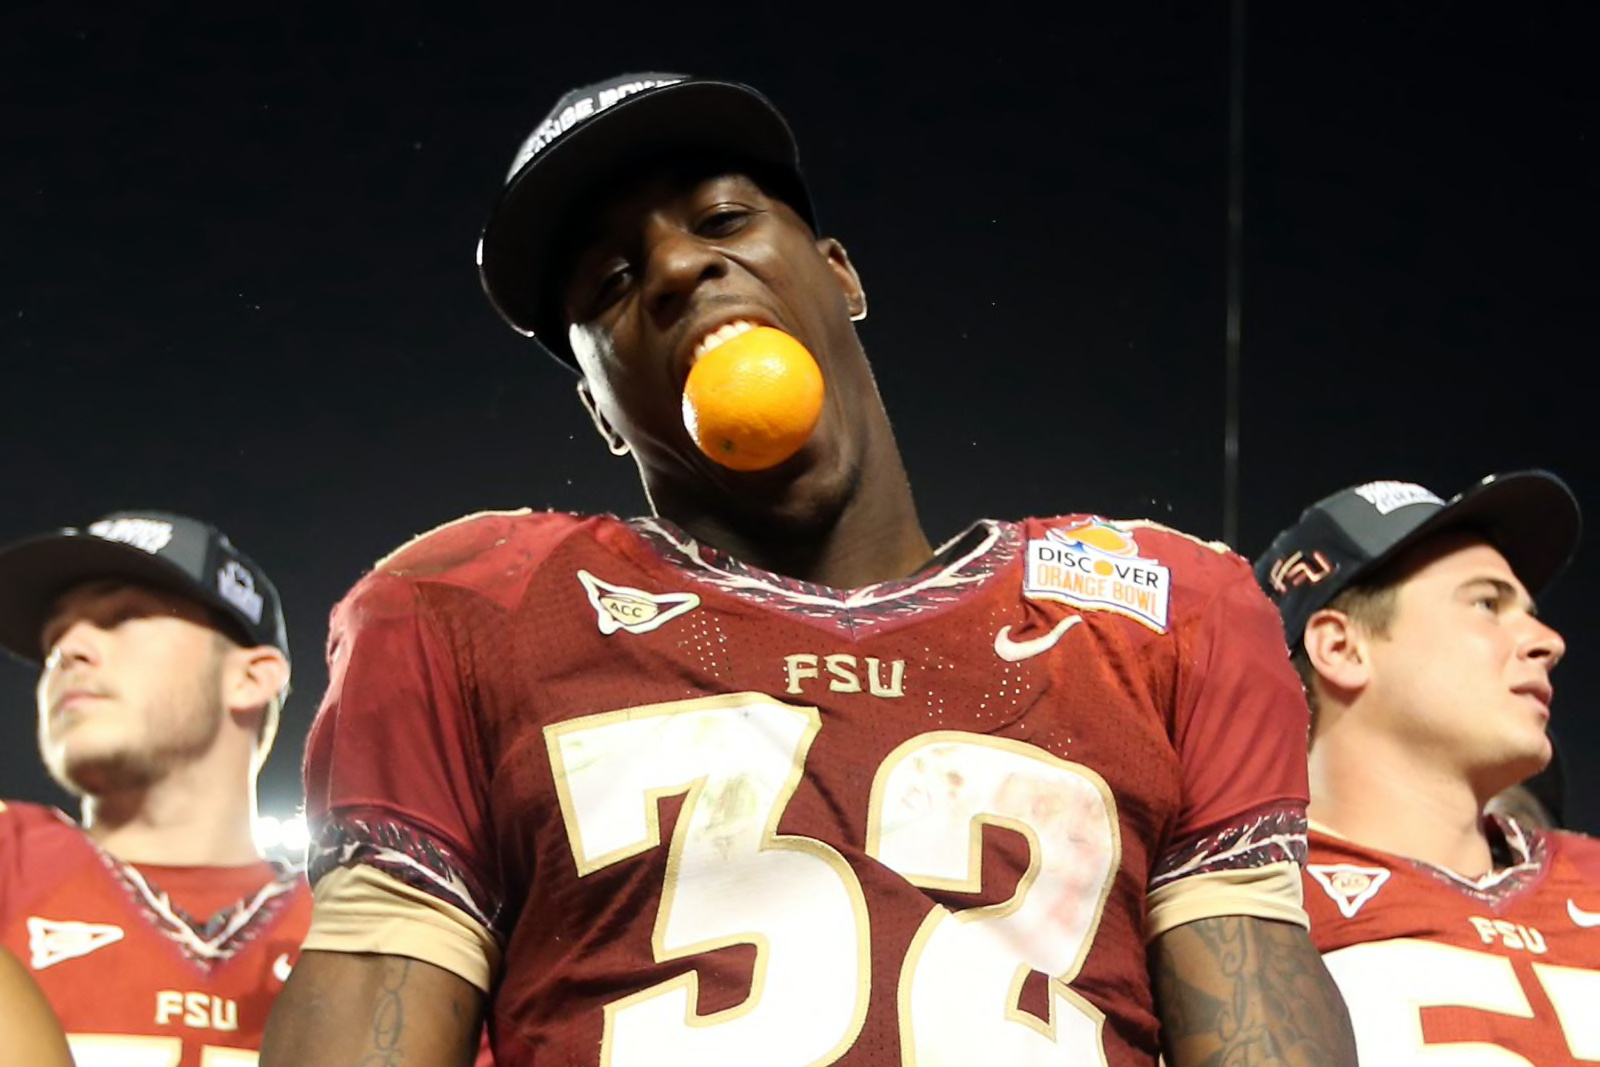 FSU running back Wilder out with cracked rib